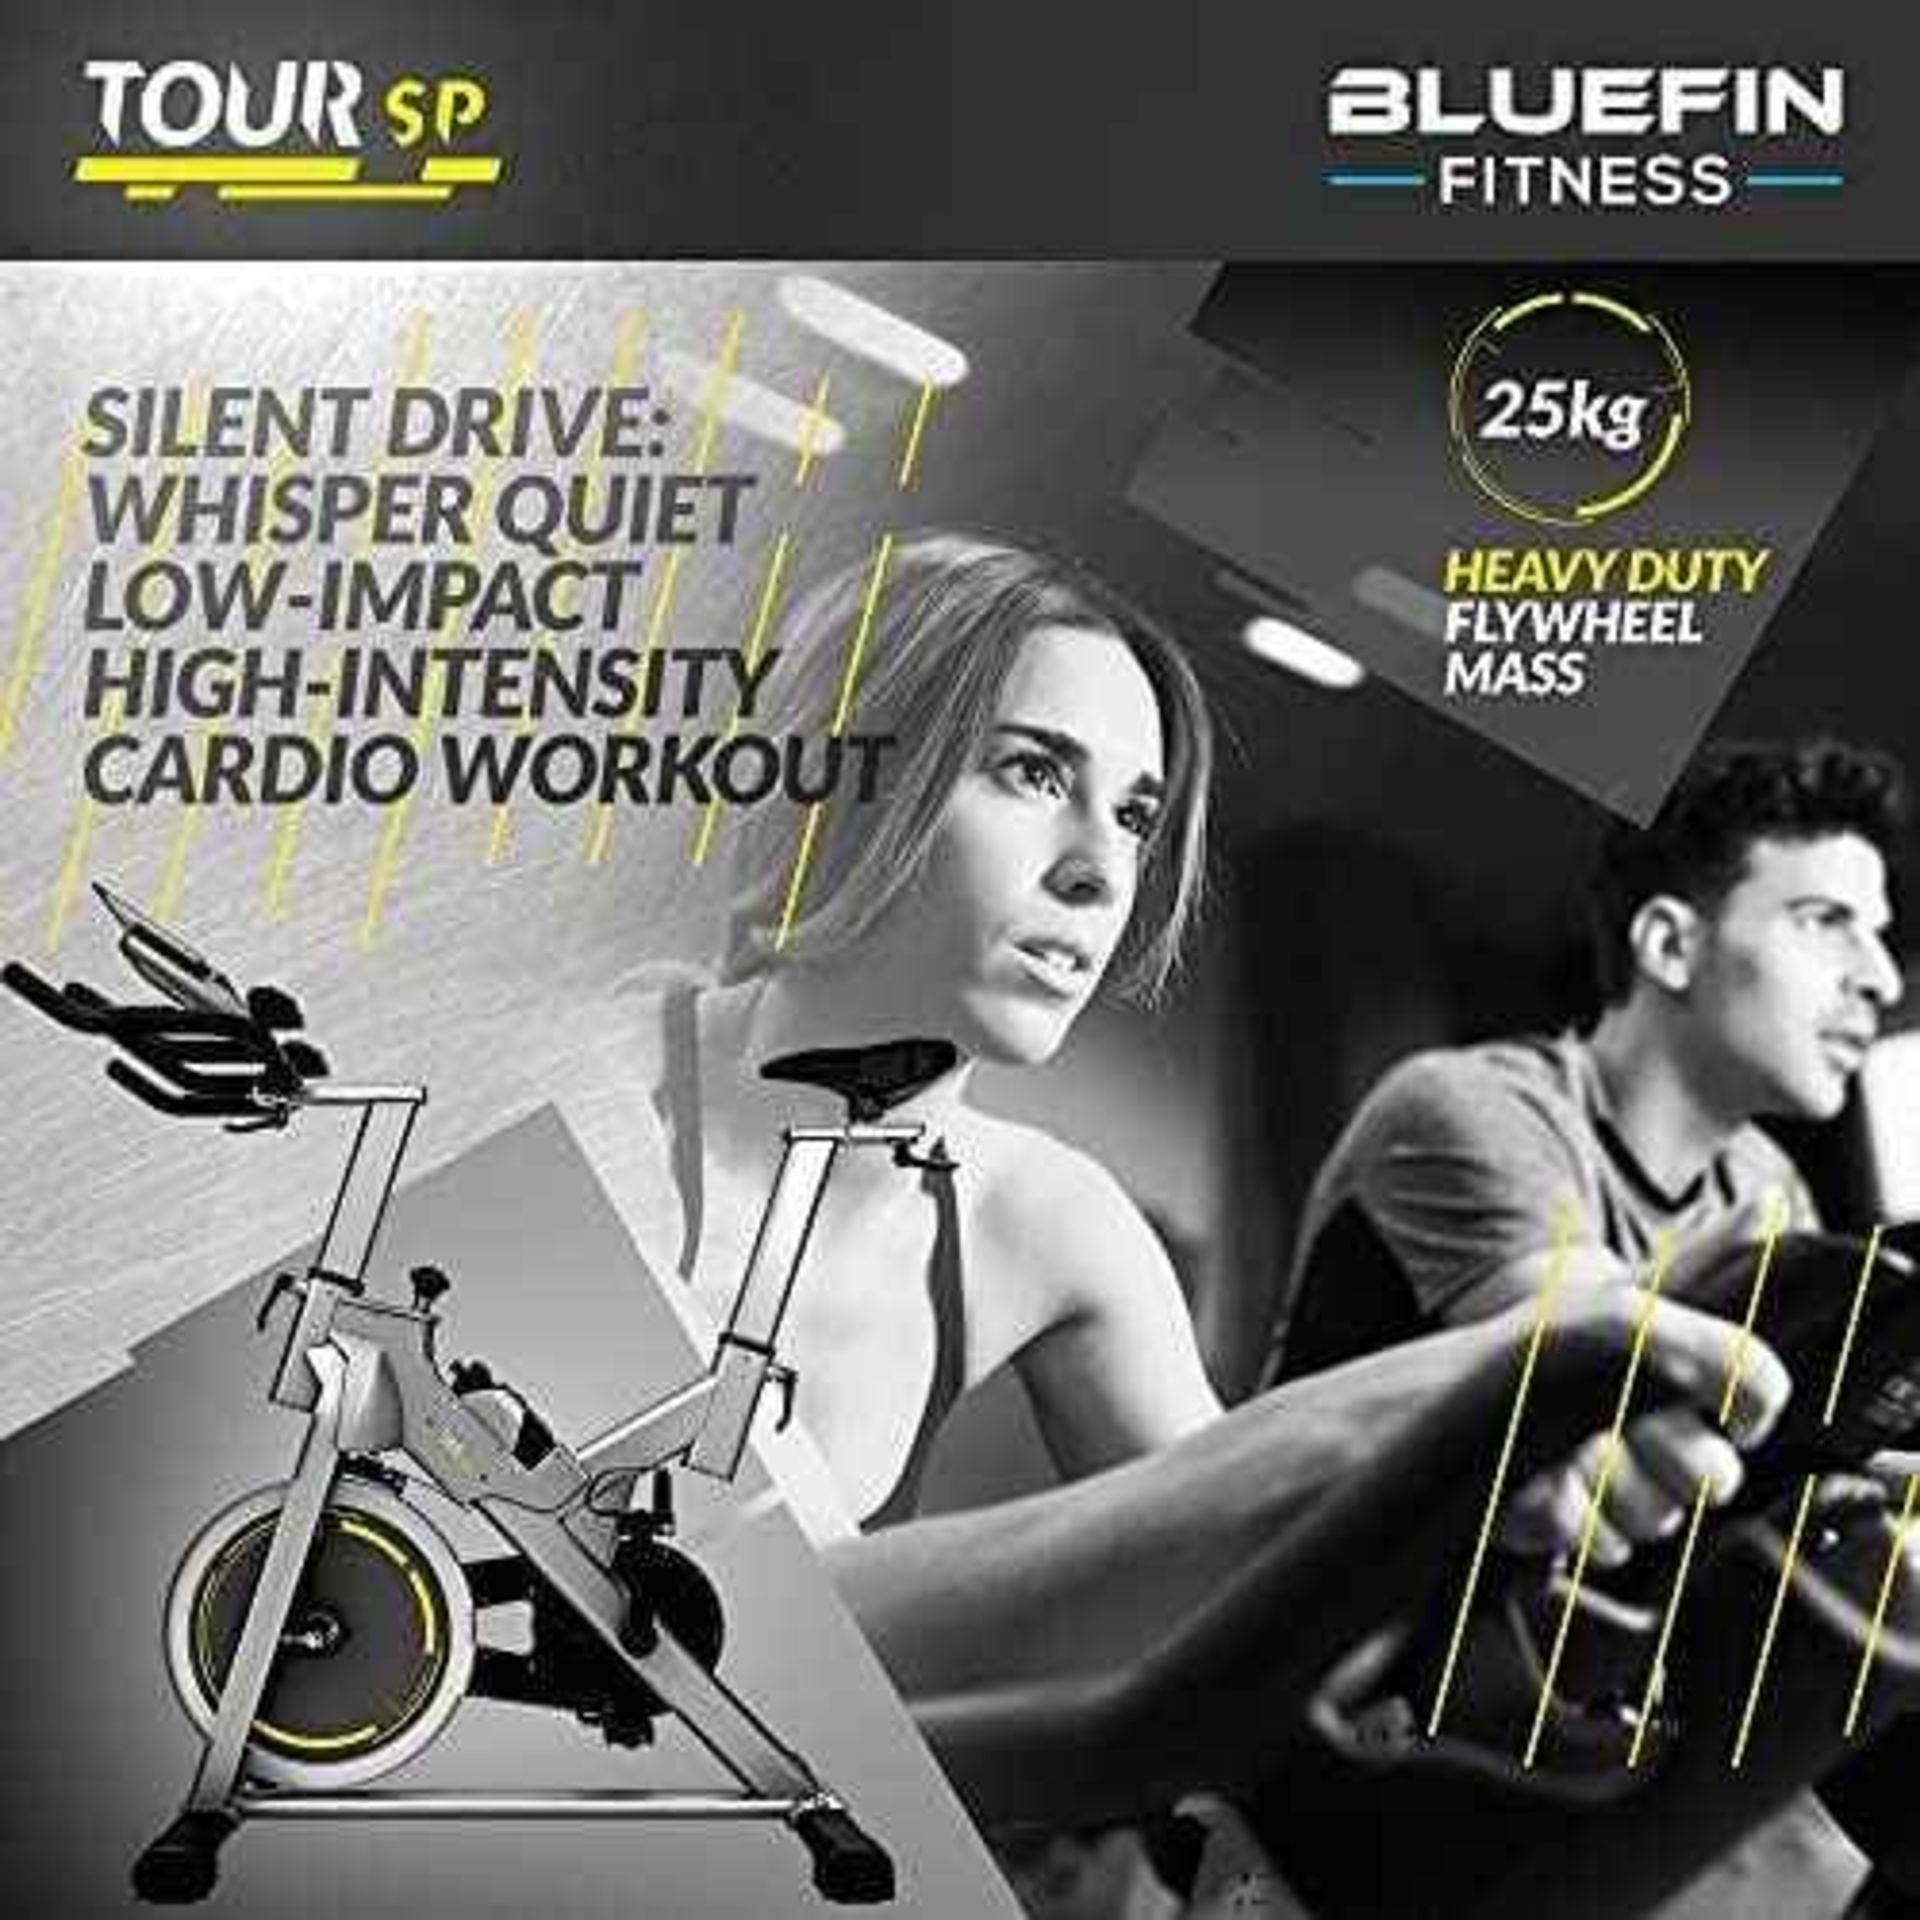 BLUEFIN FITNESS TOUR SP BIKE WITH LCD DIGITAL FITNESS CONSOLE AND COACHING APP RRP £499.00 - Image 2 of 5